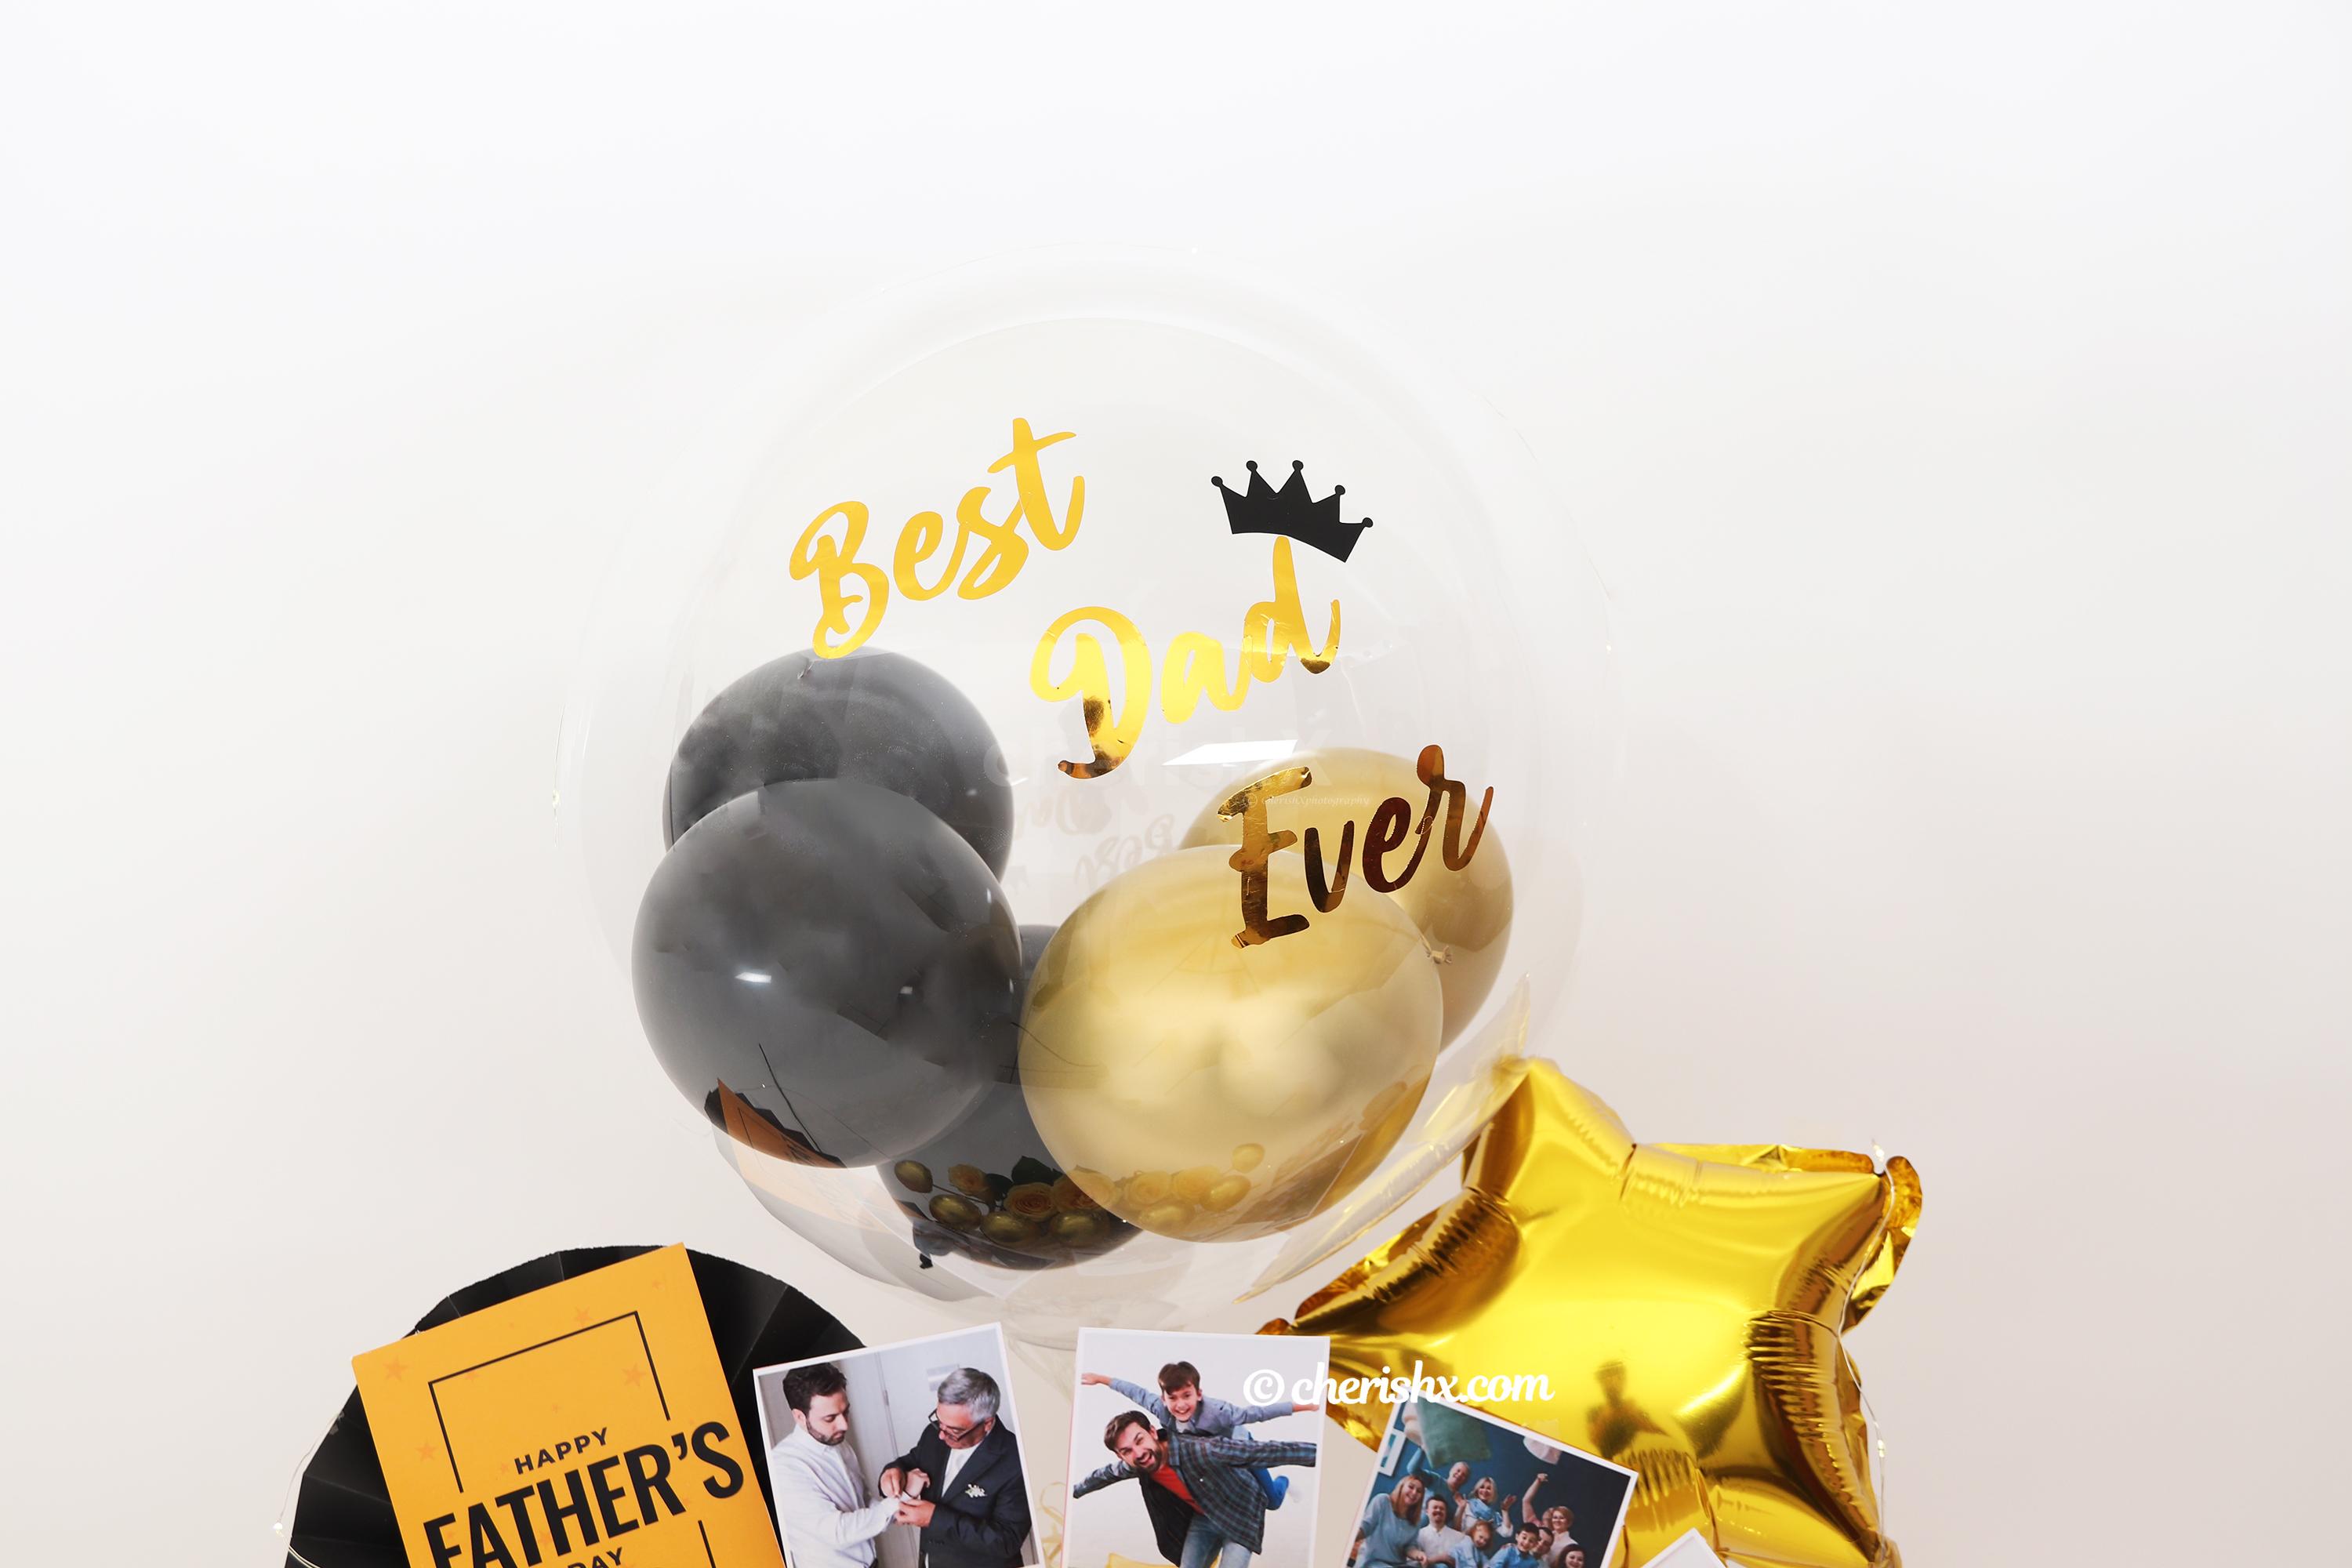 CherishX’s Black & Gold Father’s Day Bucket consists of a Bubble Balloon Filled with black and gold chrome balloons!